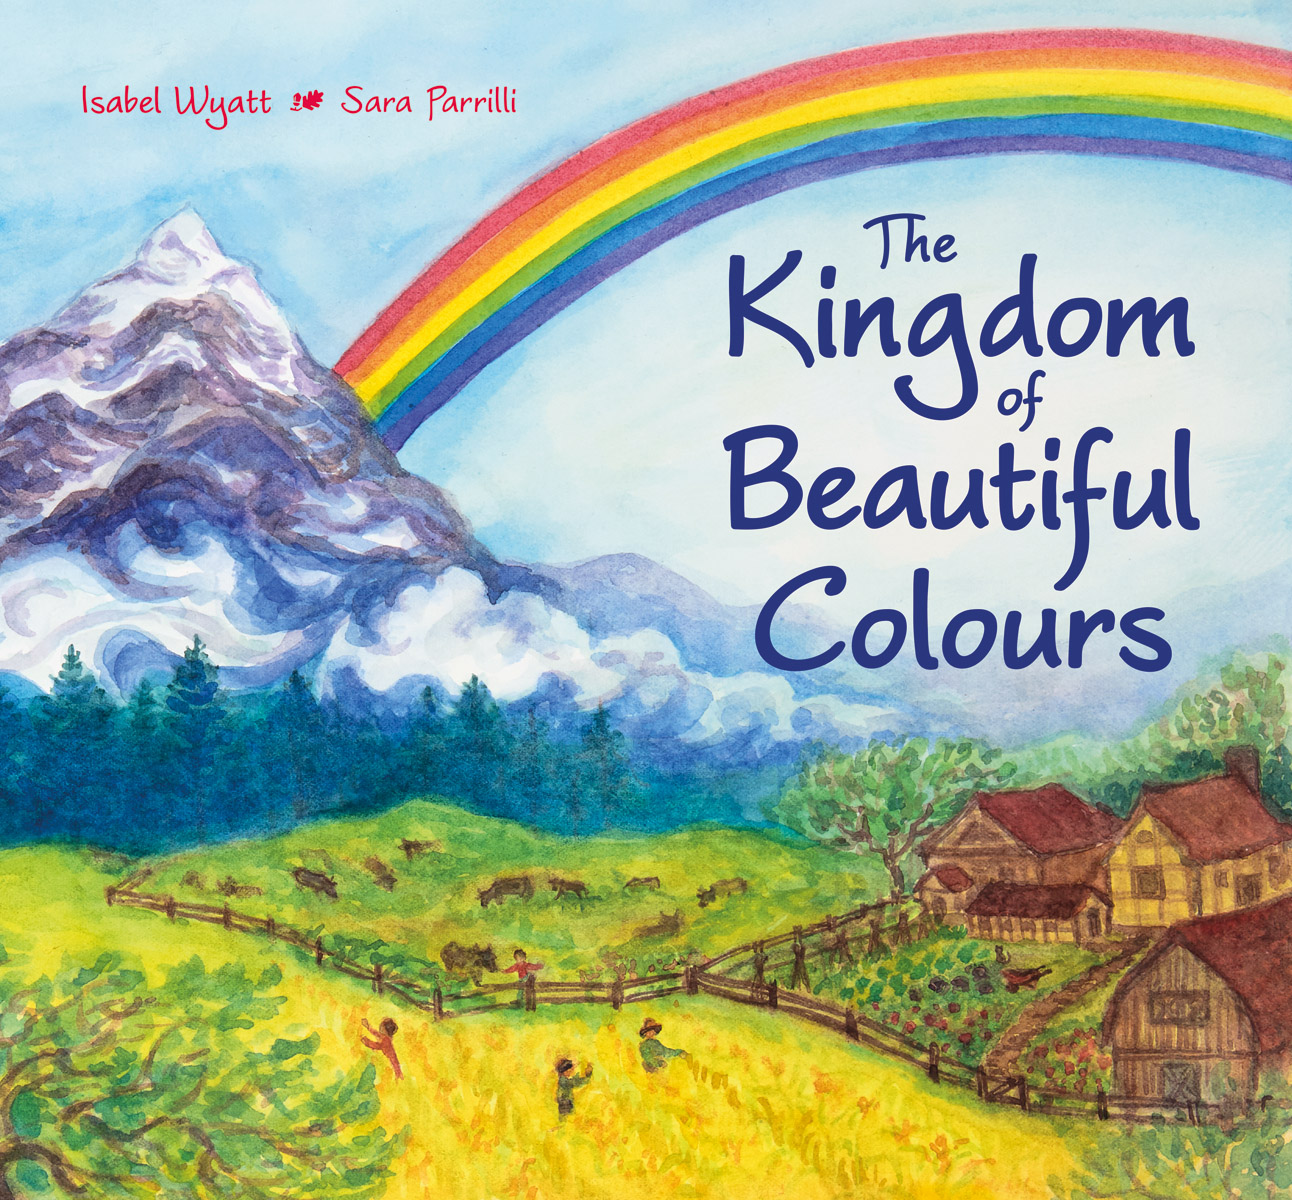 The Kingdom of Beautiful Colours, illustrated by Sara Parrilli